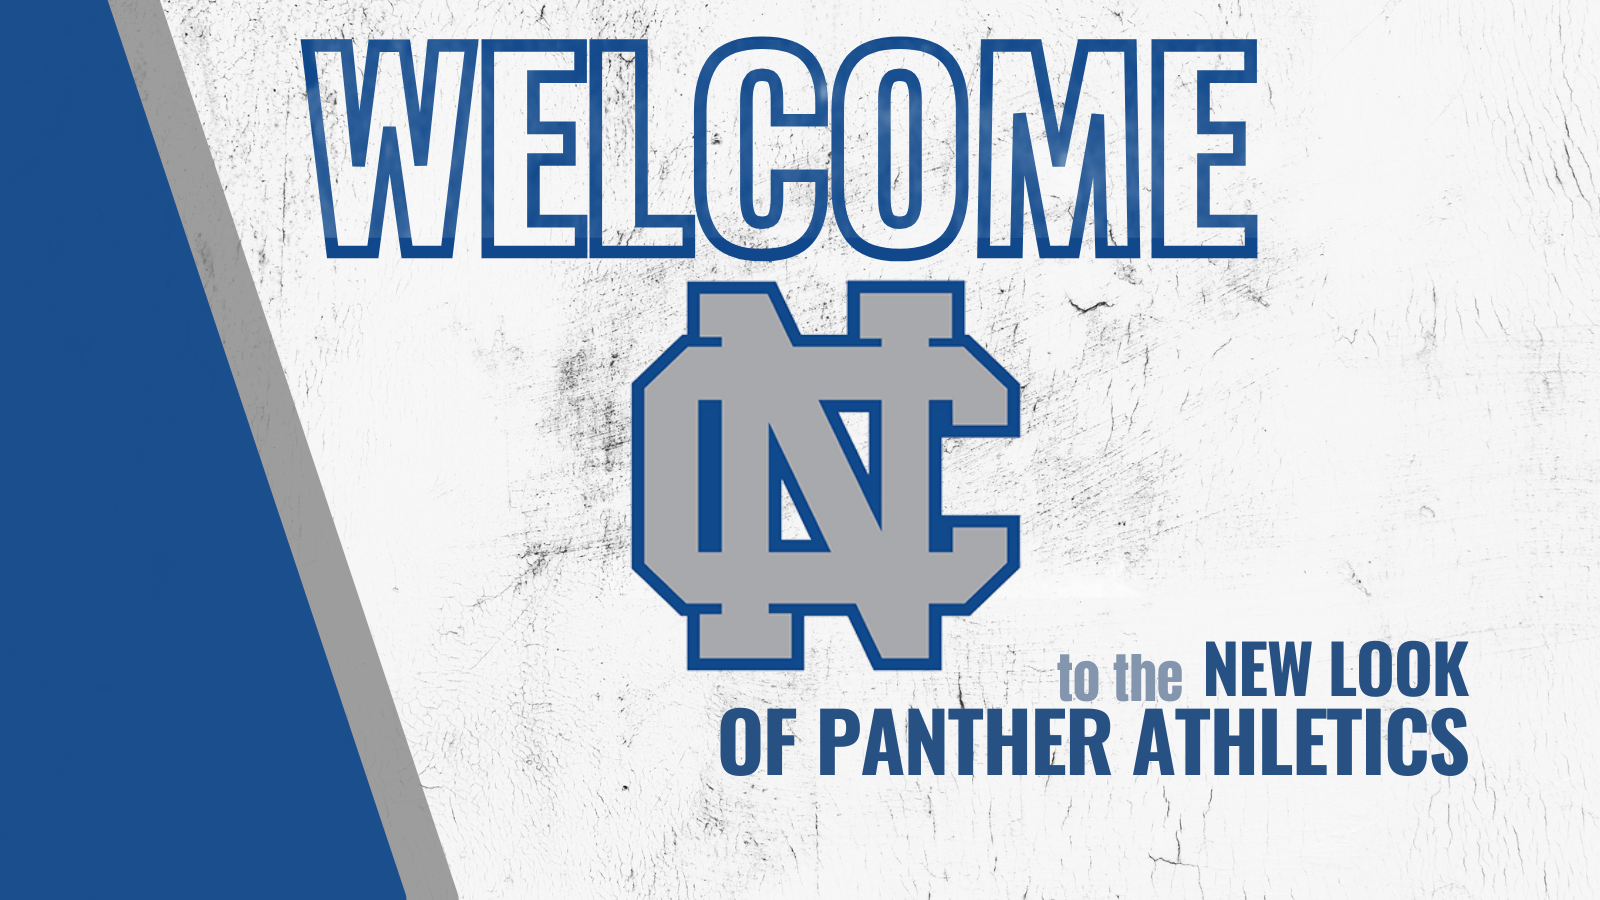 1709912461_CopyofOleyValleyWelcometo1280x320pxTwitterPost6.png - Image for 🎉 Exciting News for Panther Athletics Fans! 🎉